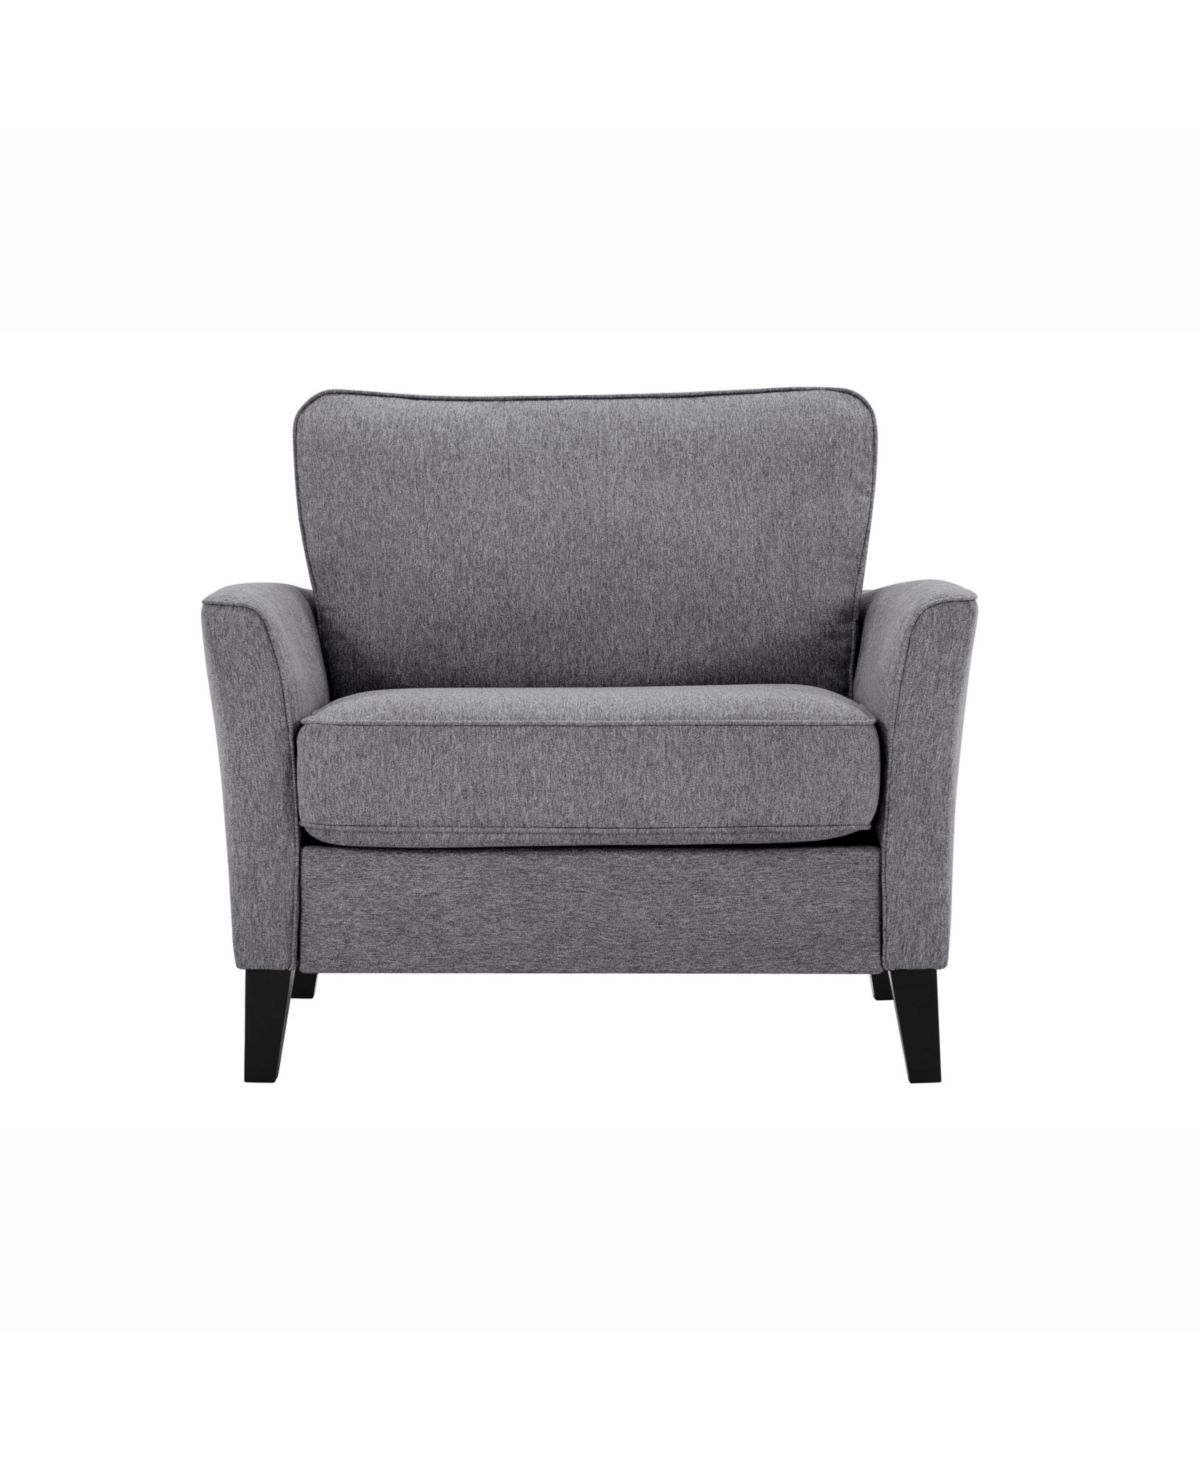 Serta 40.9" Microfiber Anna Accent Chair In Charcoal